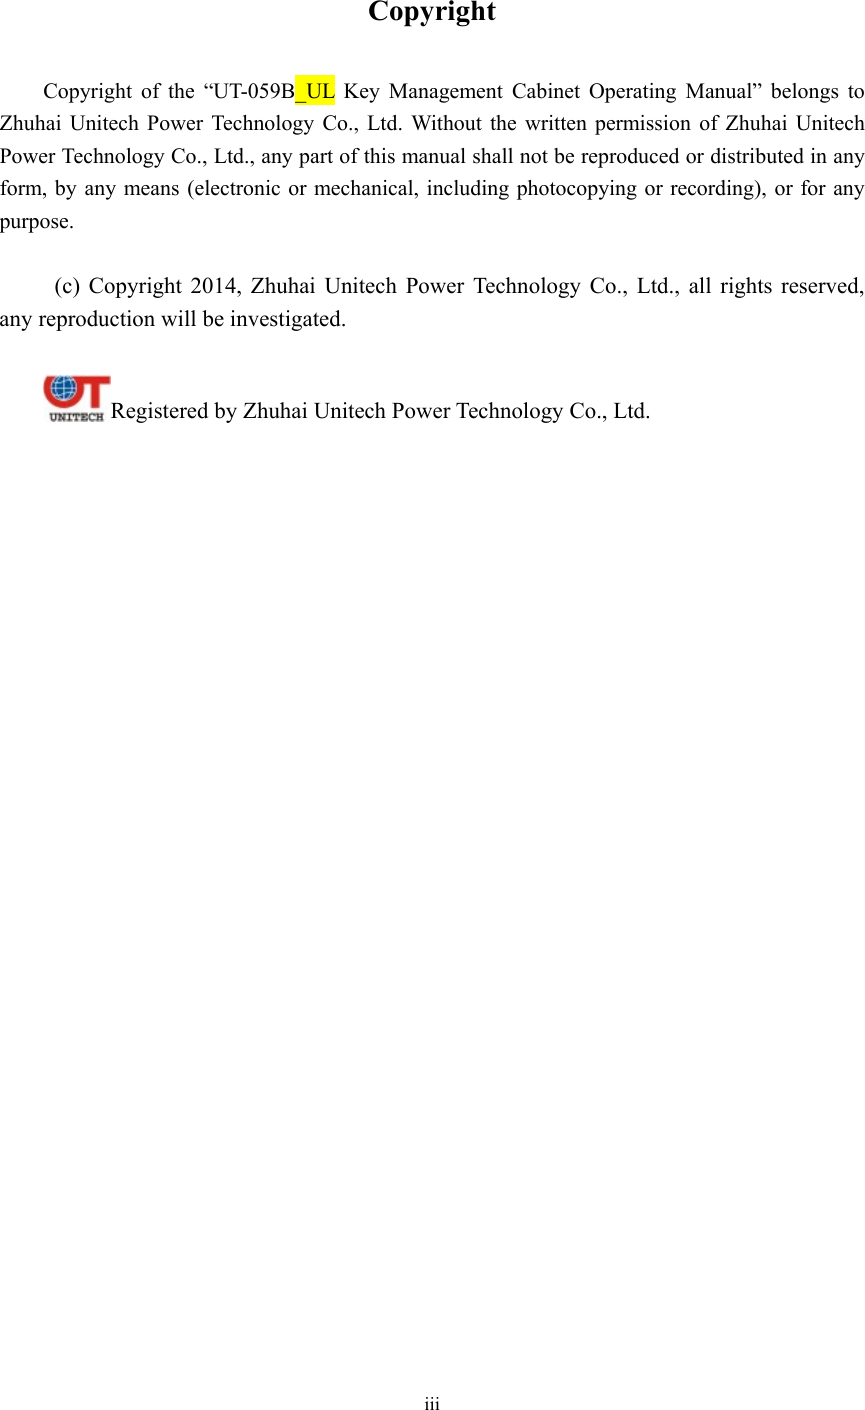 iii   Copyright  Copyright of the “UT-059B_UL Key Management Cabinet Operating Manual” belongs to Zhuhai Unitech Power Technology Co., Ltd. Without the written permission of Zhuhai Unitech Power Technology Co., Ltd., any part of this manual shall not be reproduced or distributed in any form, by any means (electronic or mechanical, including photocopying or recording), or for any purpose.    (c) Copyright 2014, Zhuhai Unitech Power Technology Co., Ltd., all rights reserved, any reproduction will be investigated.  Registered by Zhuhai Unitech Power Technology Co., Ltd. 